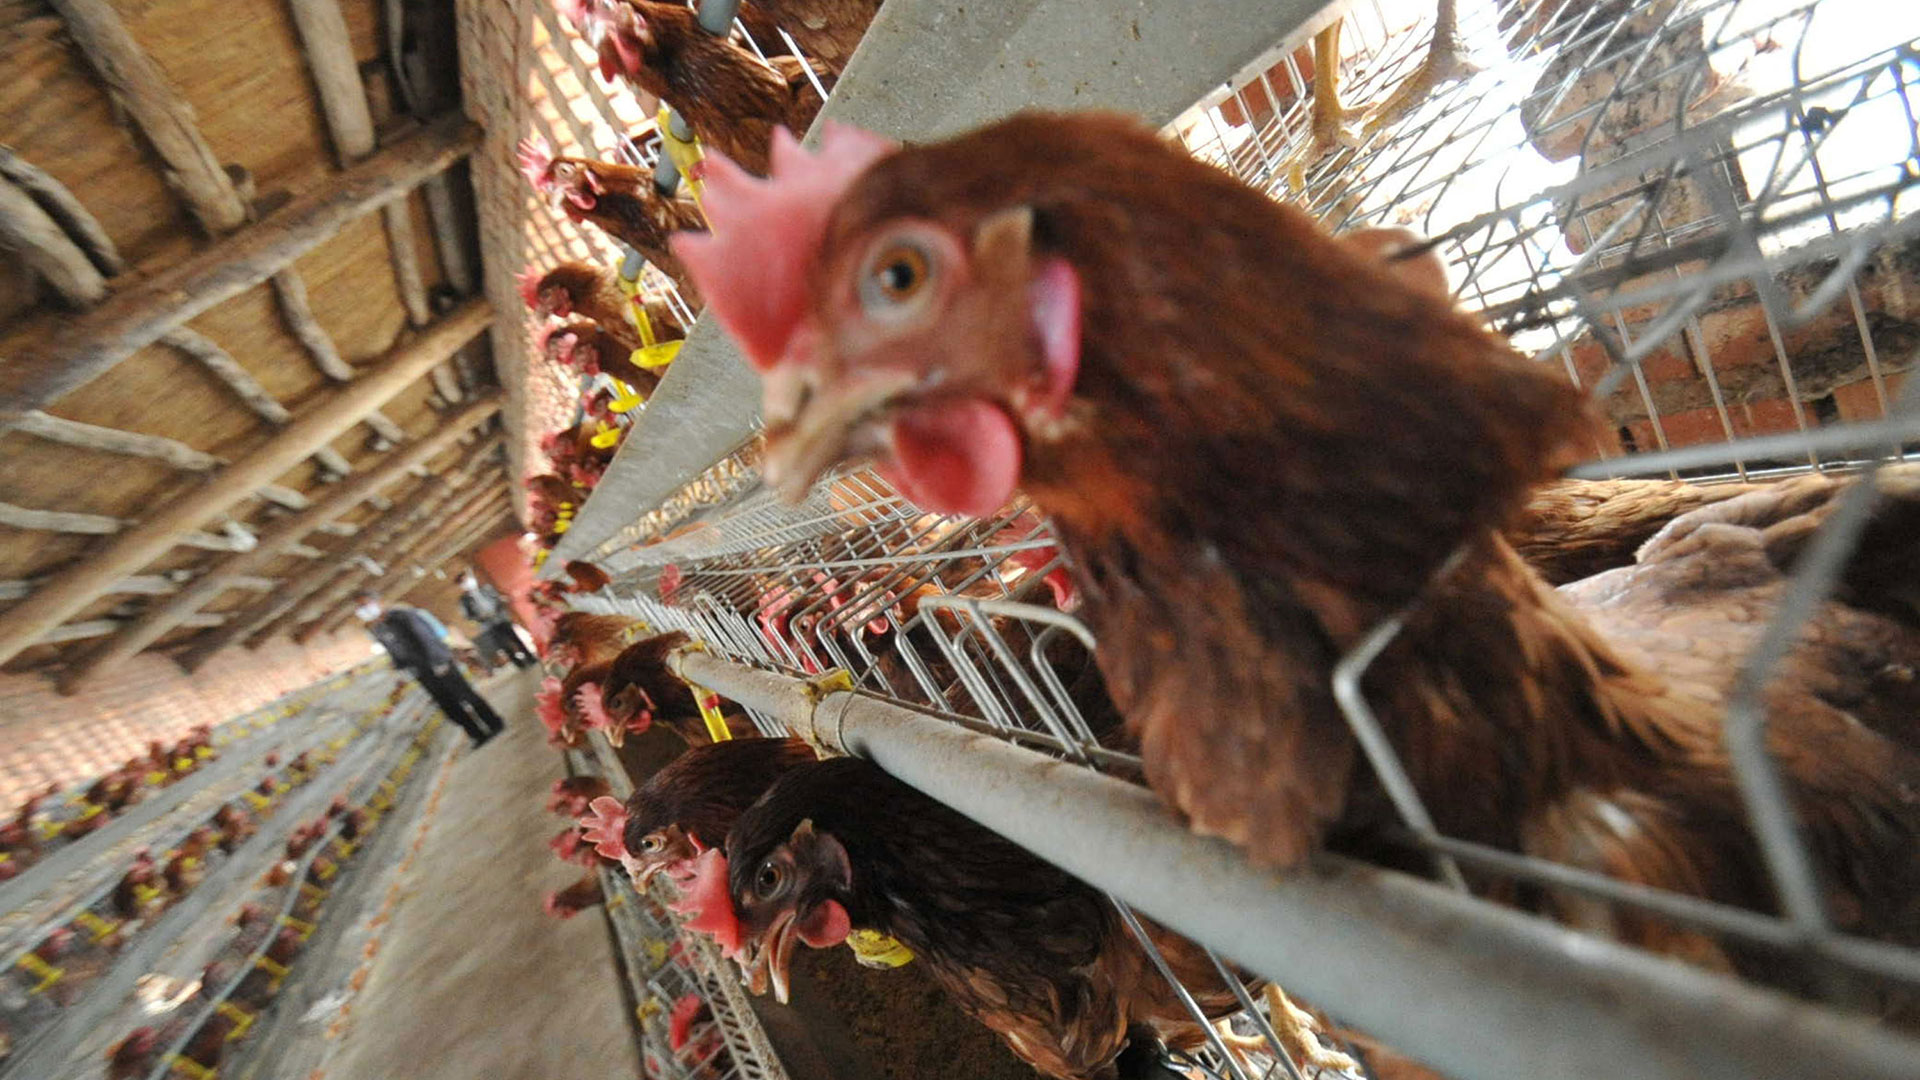 YUNCHENG, CHINA - APRIL 18:  (CHINA OUT) Chickens are seen at a poultry farm on April 18, 2013 in Yuncheng, China. China on Thursday confirmed five new cases of H7N9 avian influenza, bringing the total to 87 cases in the country, with 17 deaths.  (Photo by Getty Images)